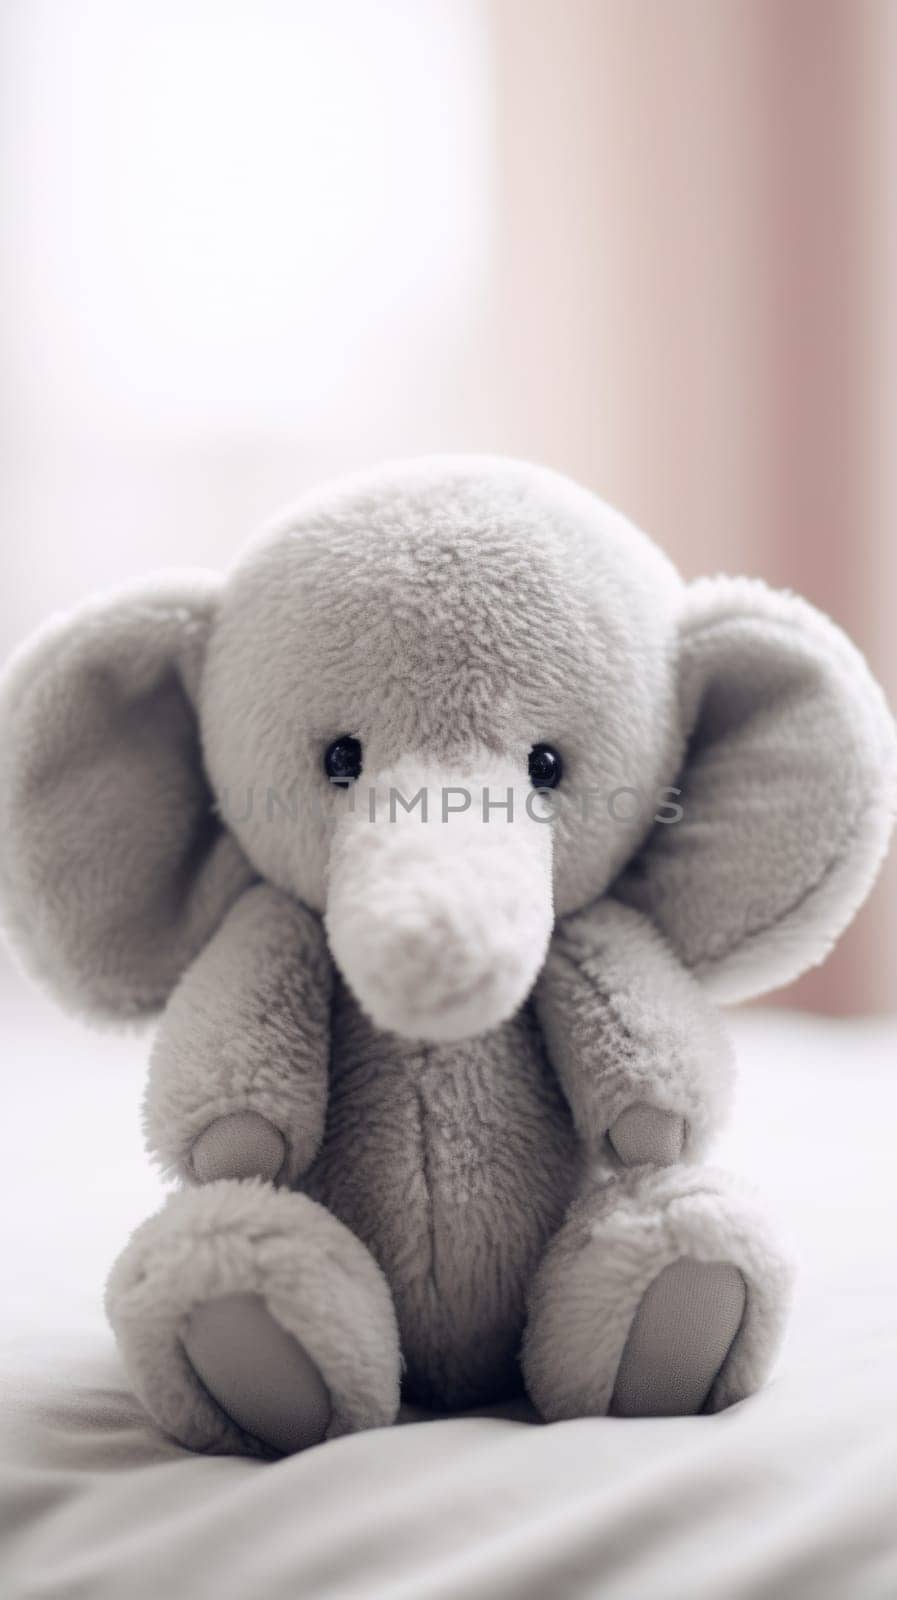 A stuffed elephant sitting on a bed, AI by starush